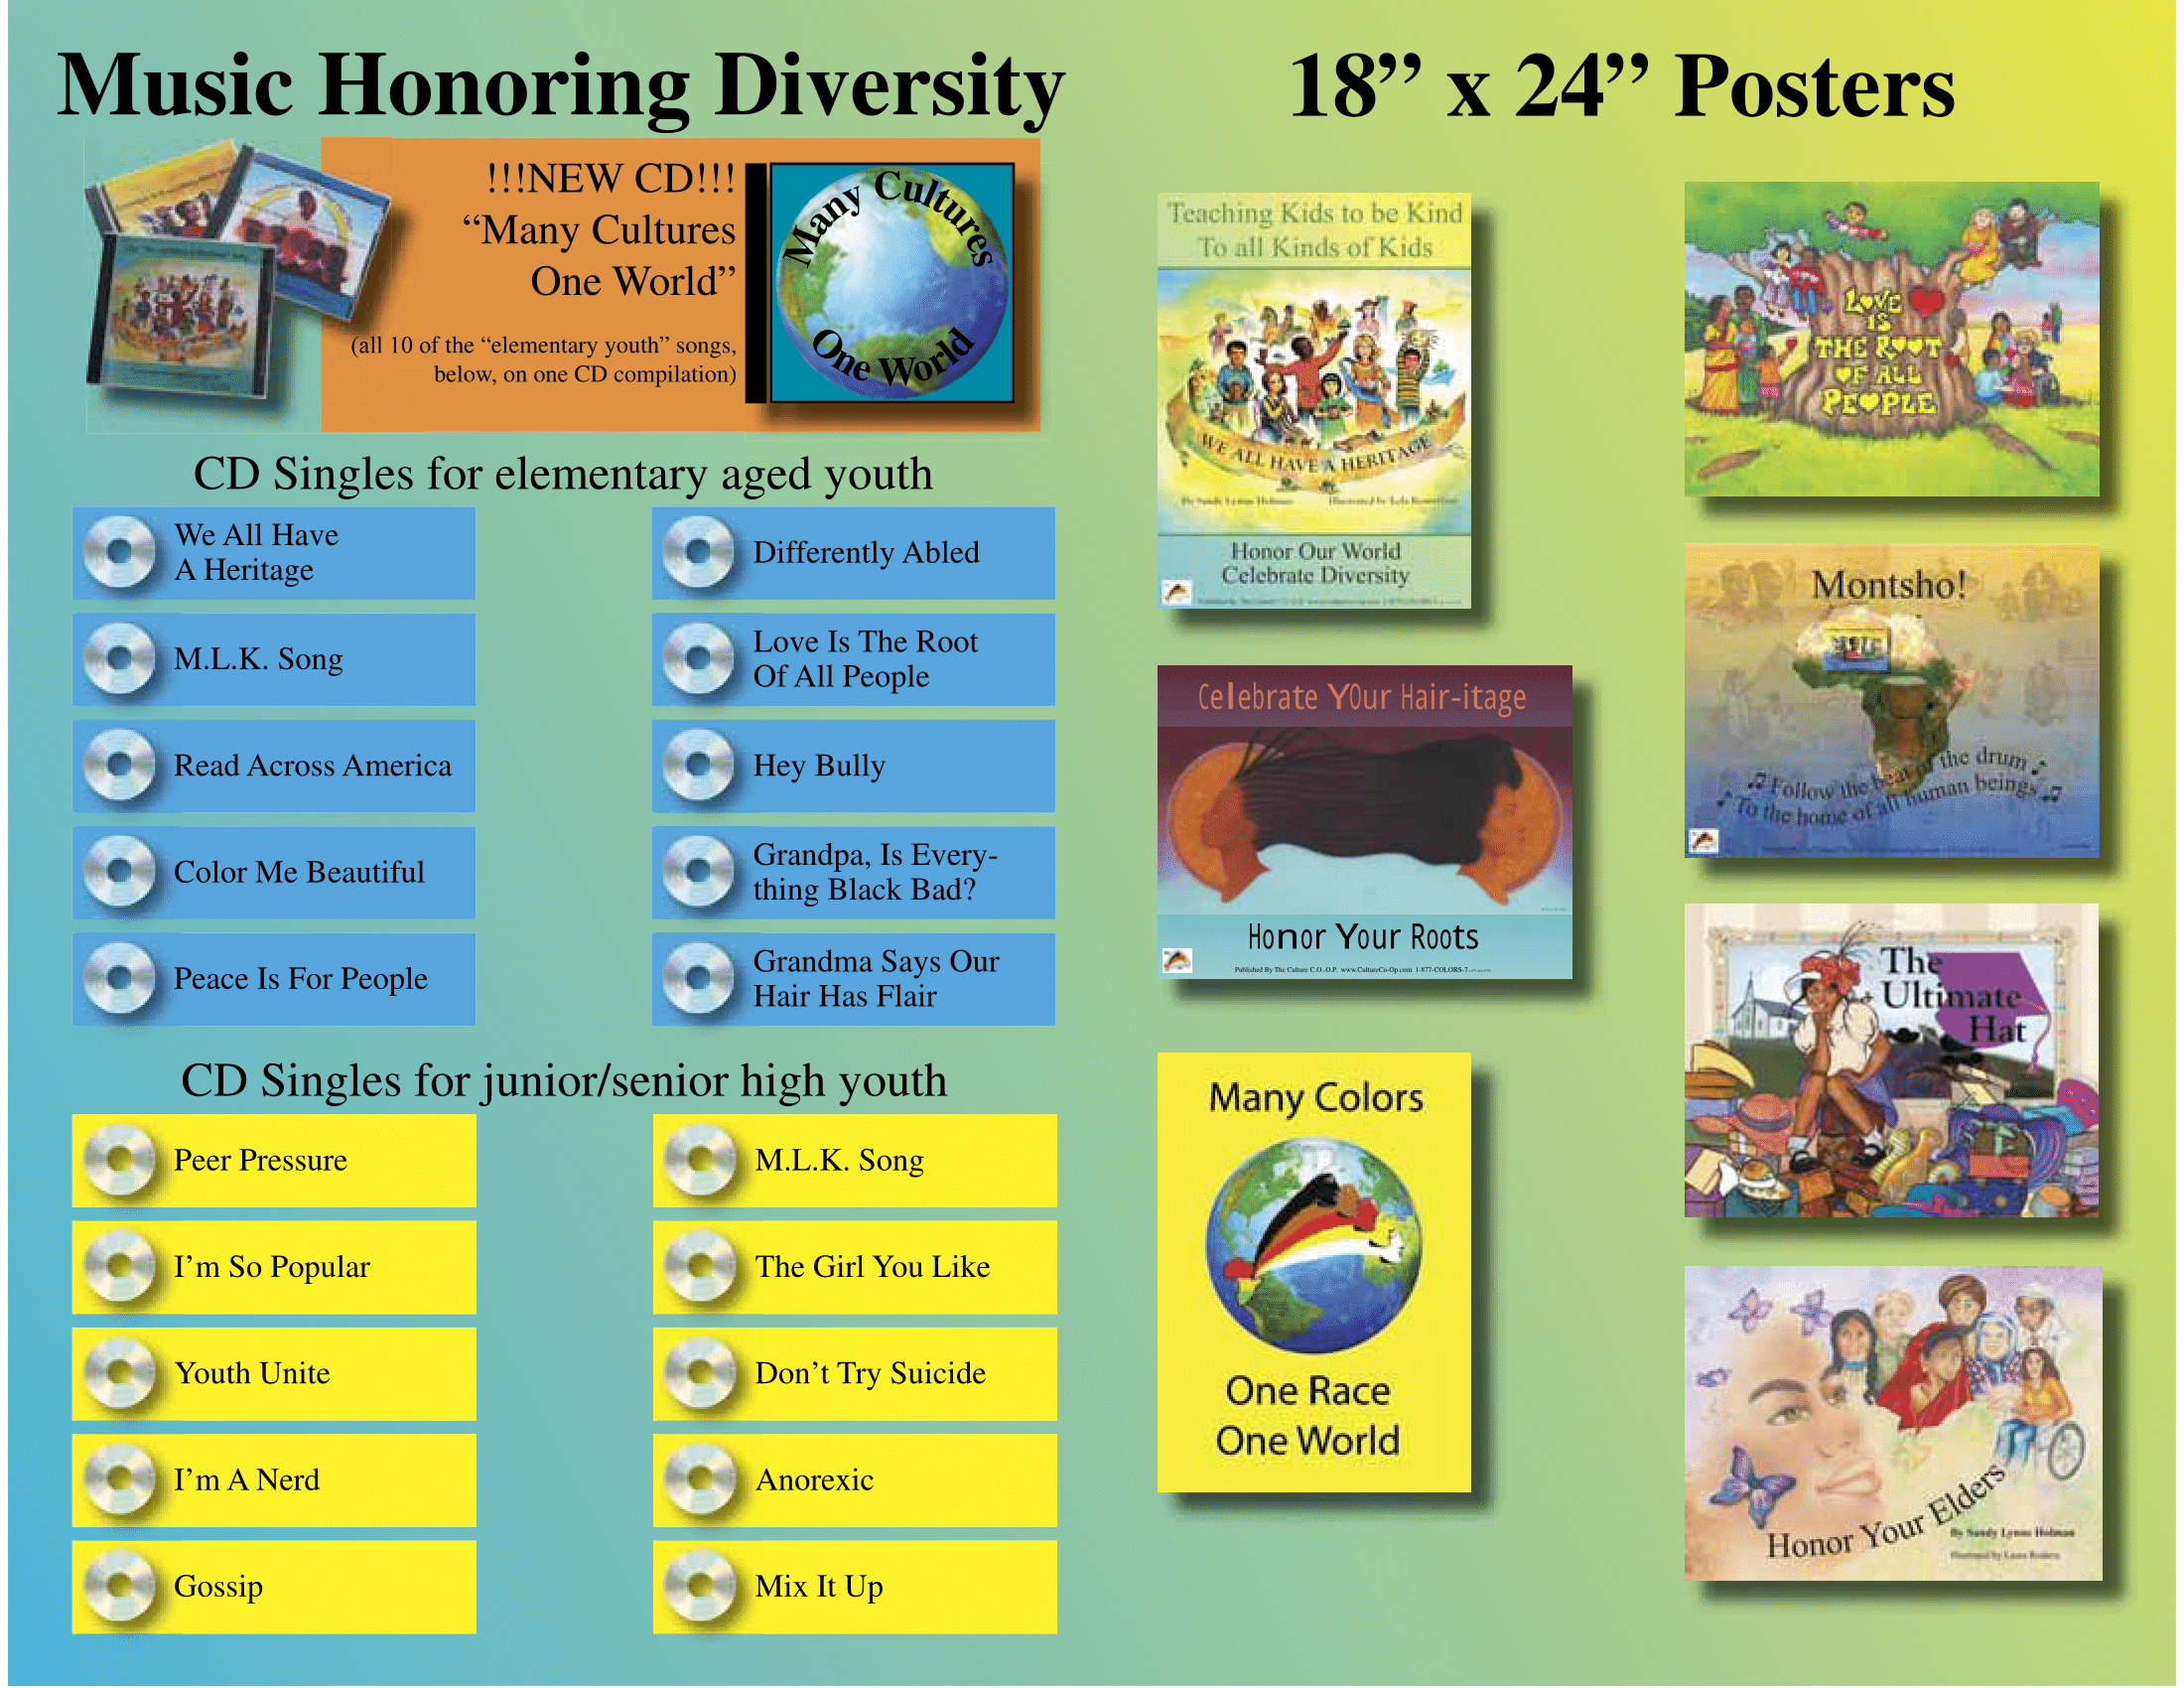 CD Single Differently Abled